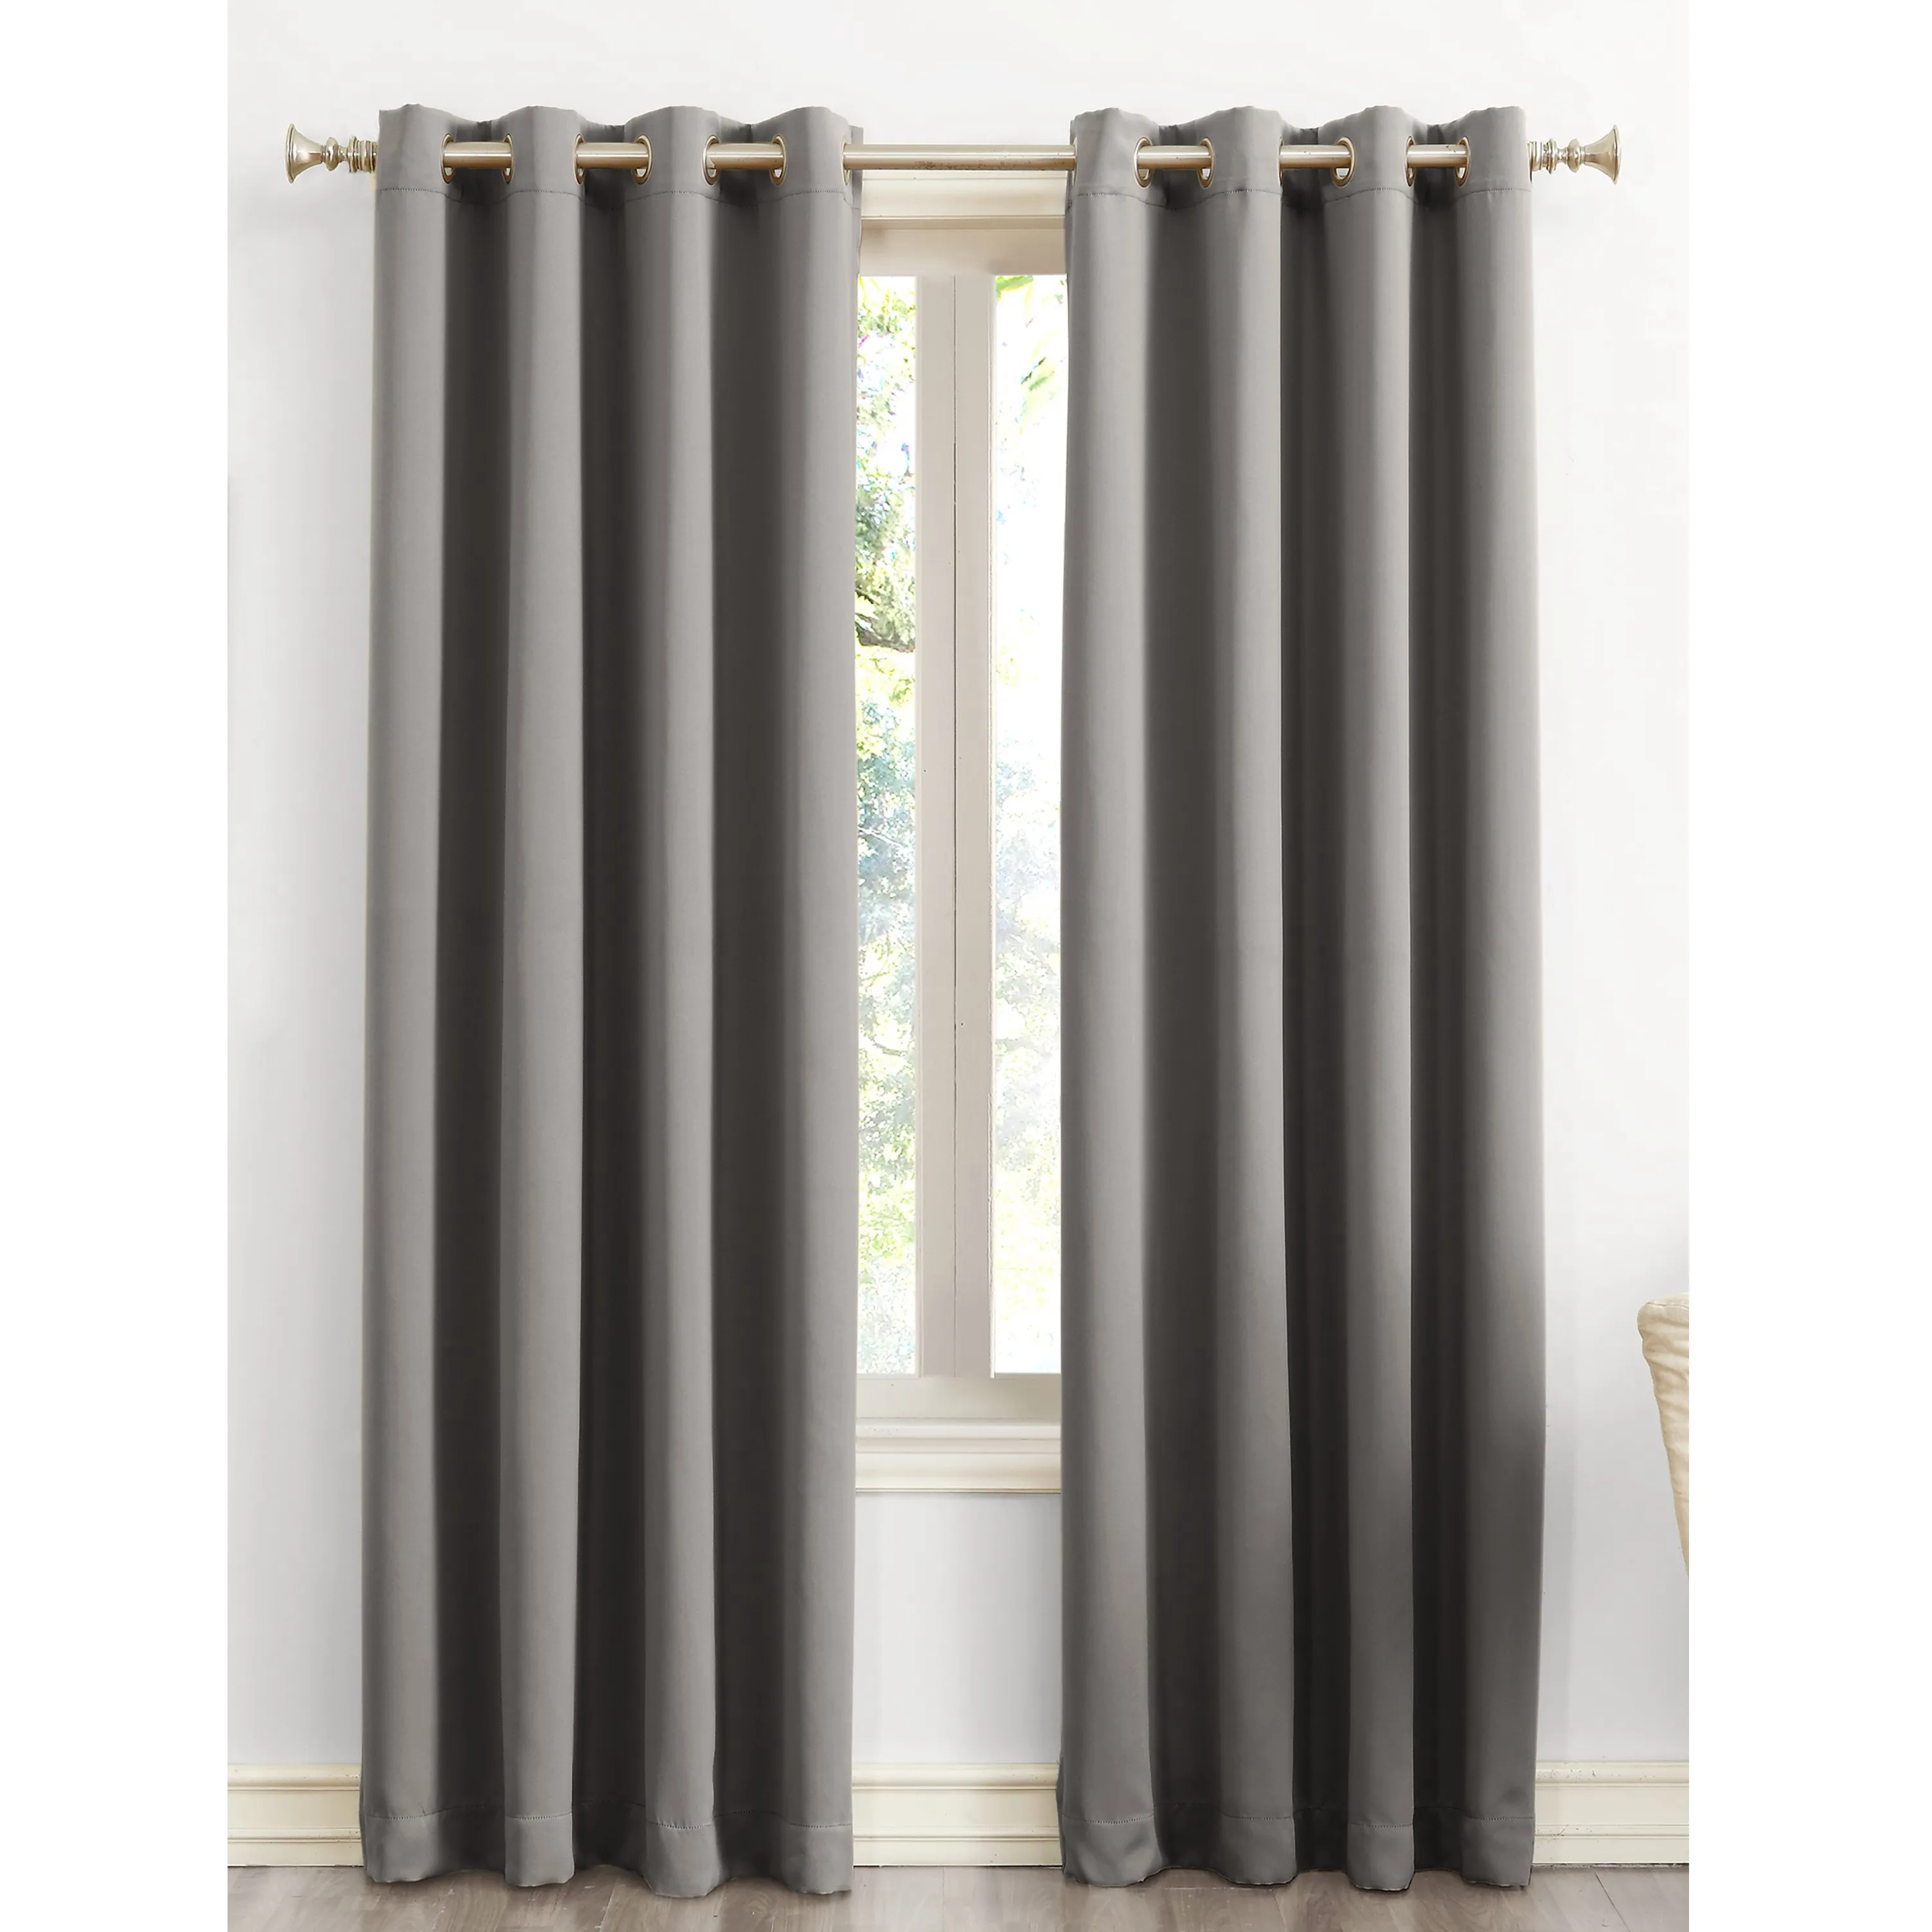 OWENIE Hot Sale Grey Polyester Thermal Insulated Ready Made Grommet Blackout Curtains for Home Bedroom